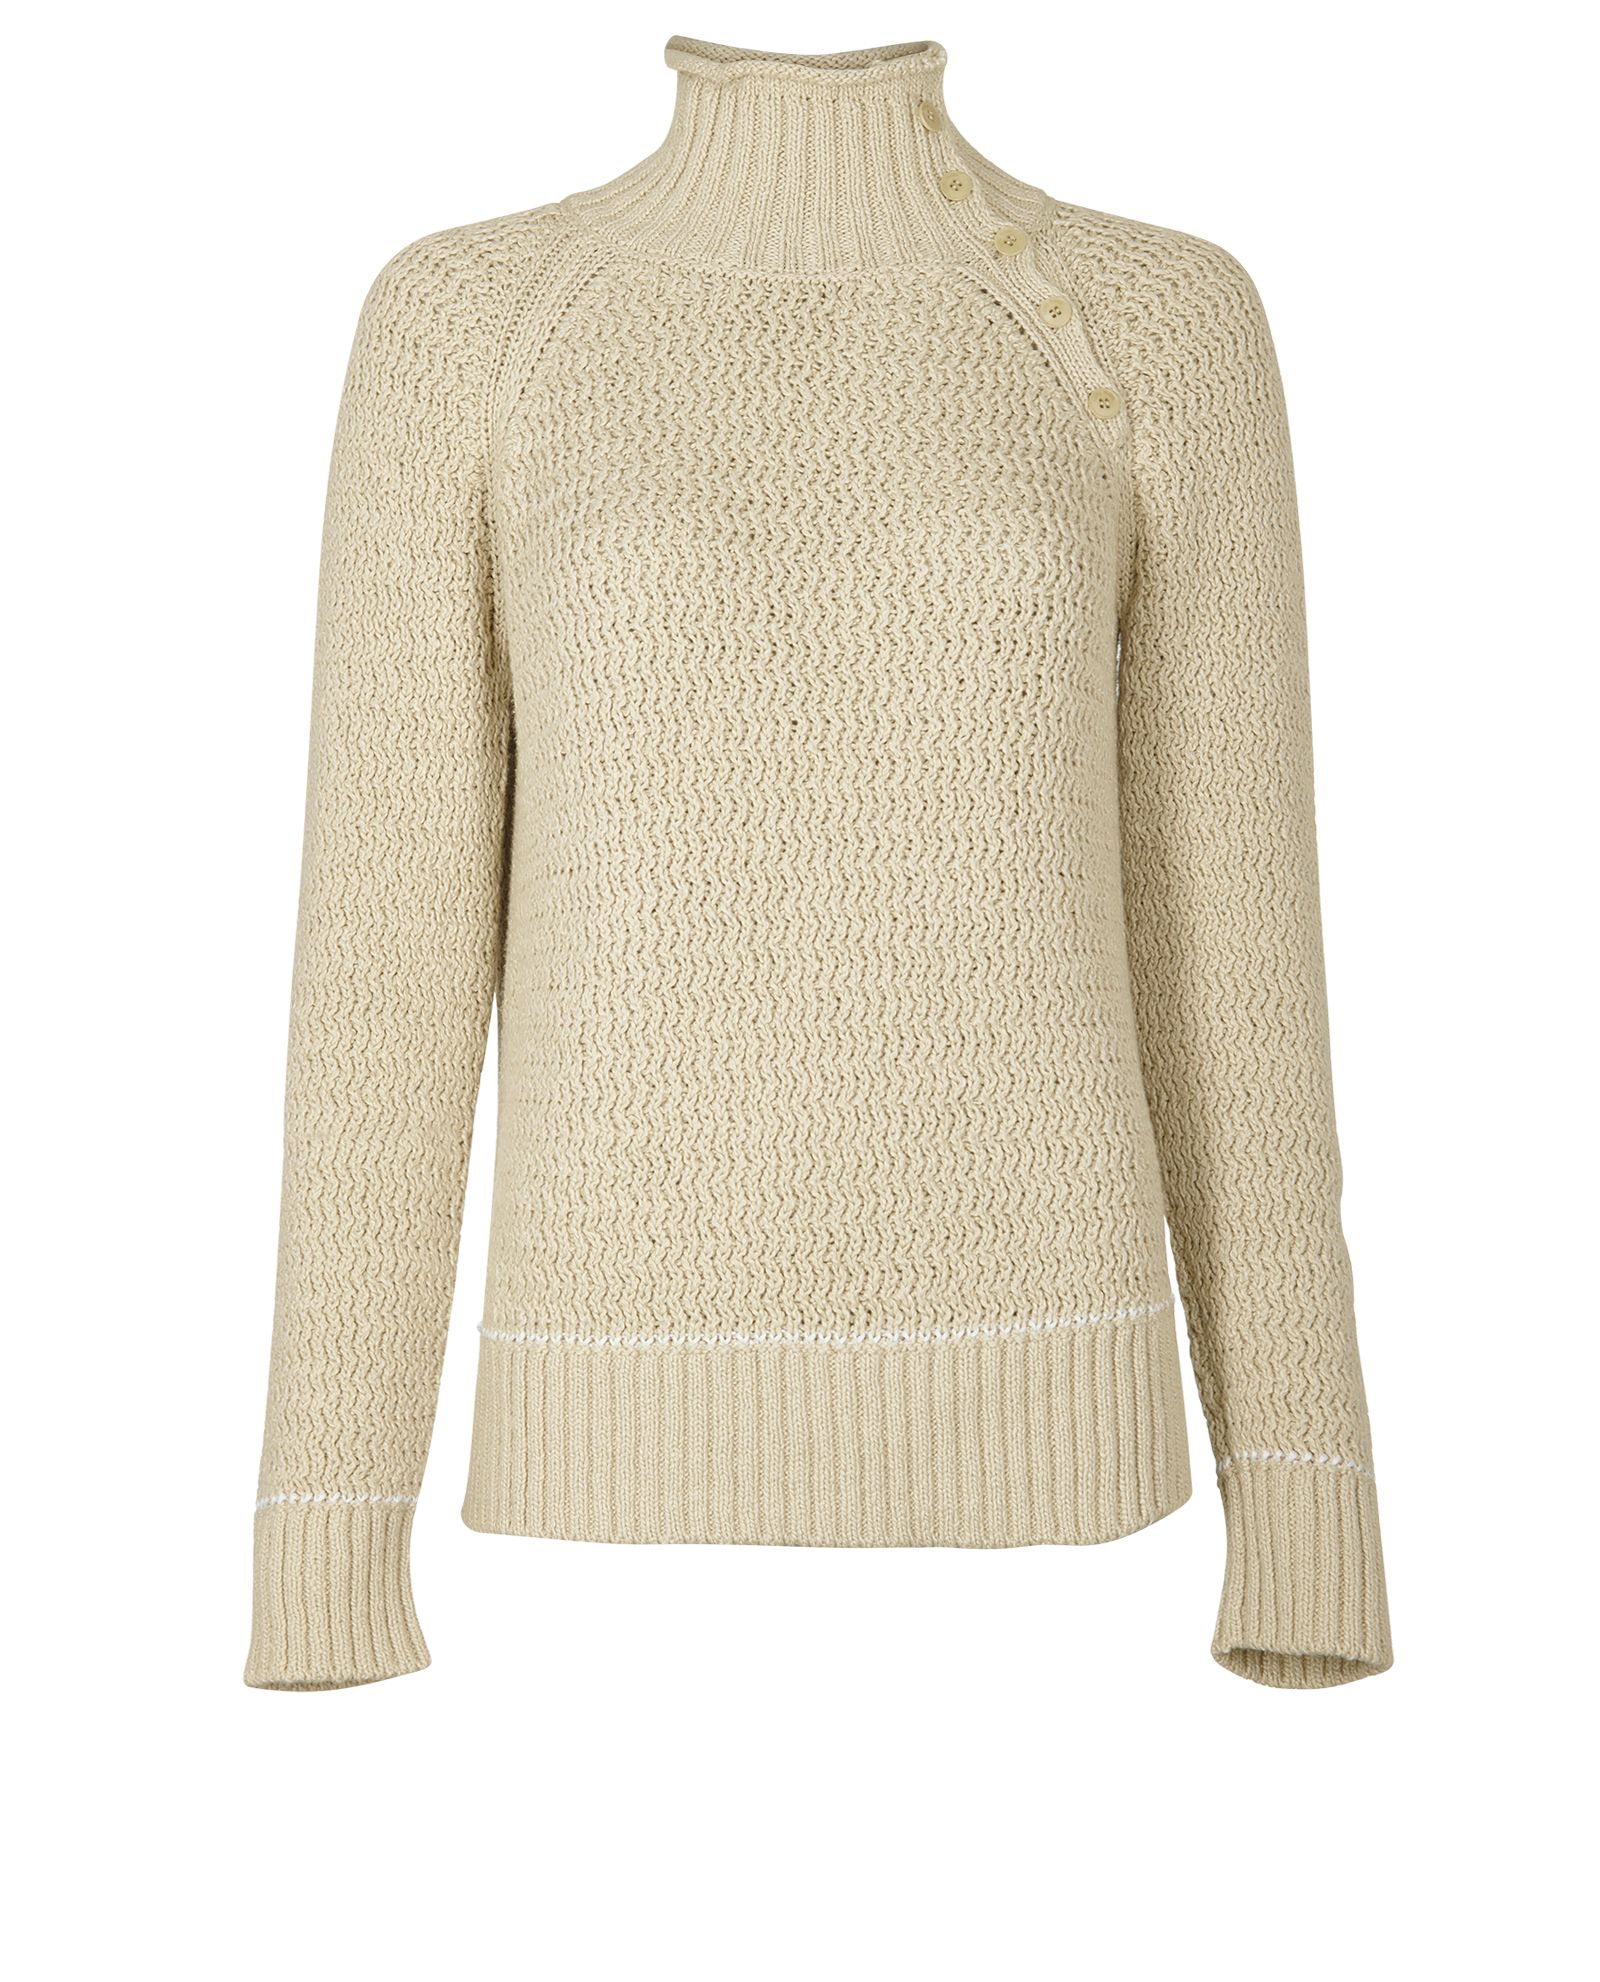 Loro Piana High Neck Knitted Jumper, Jumpers - Designer Exchange | Buy ...